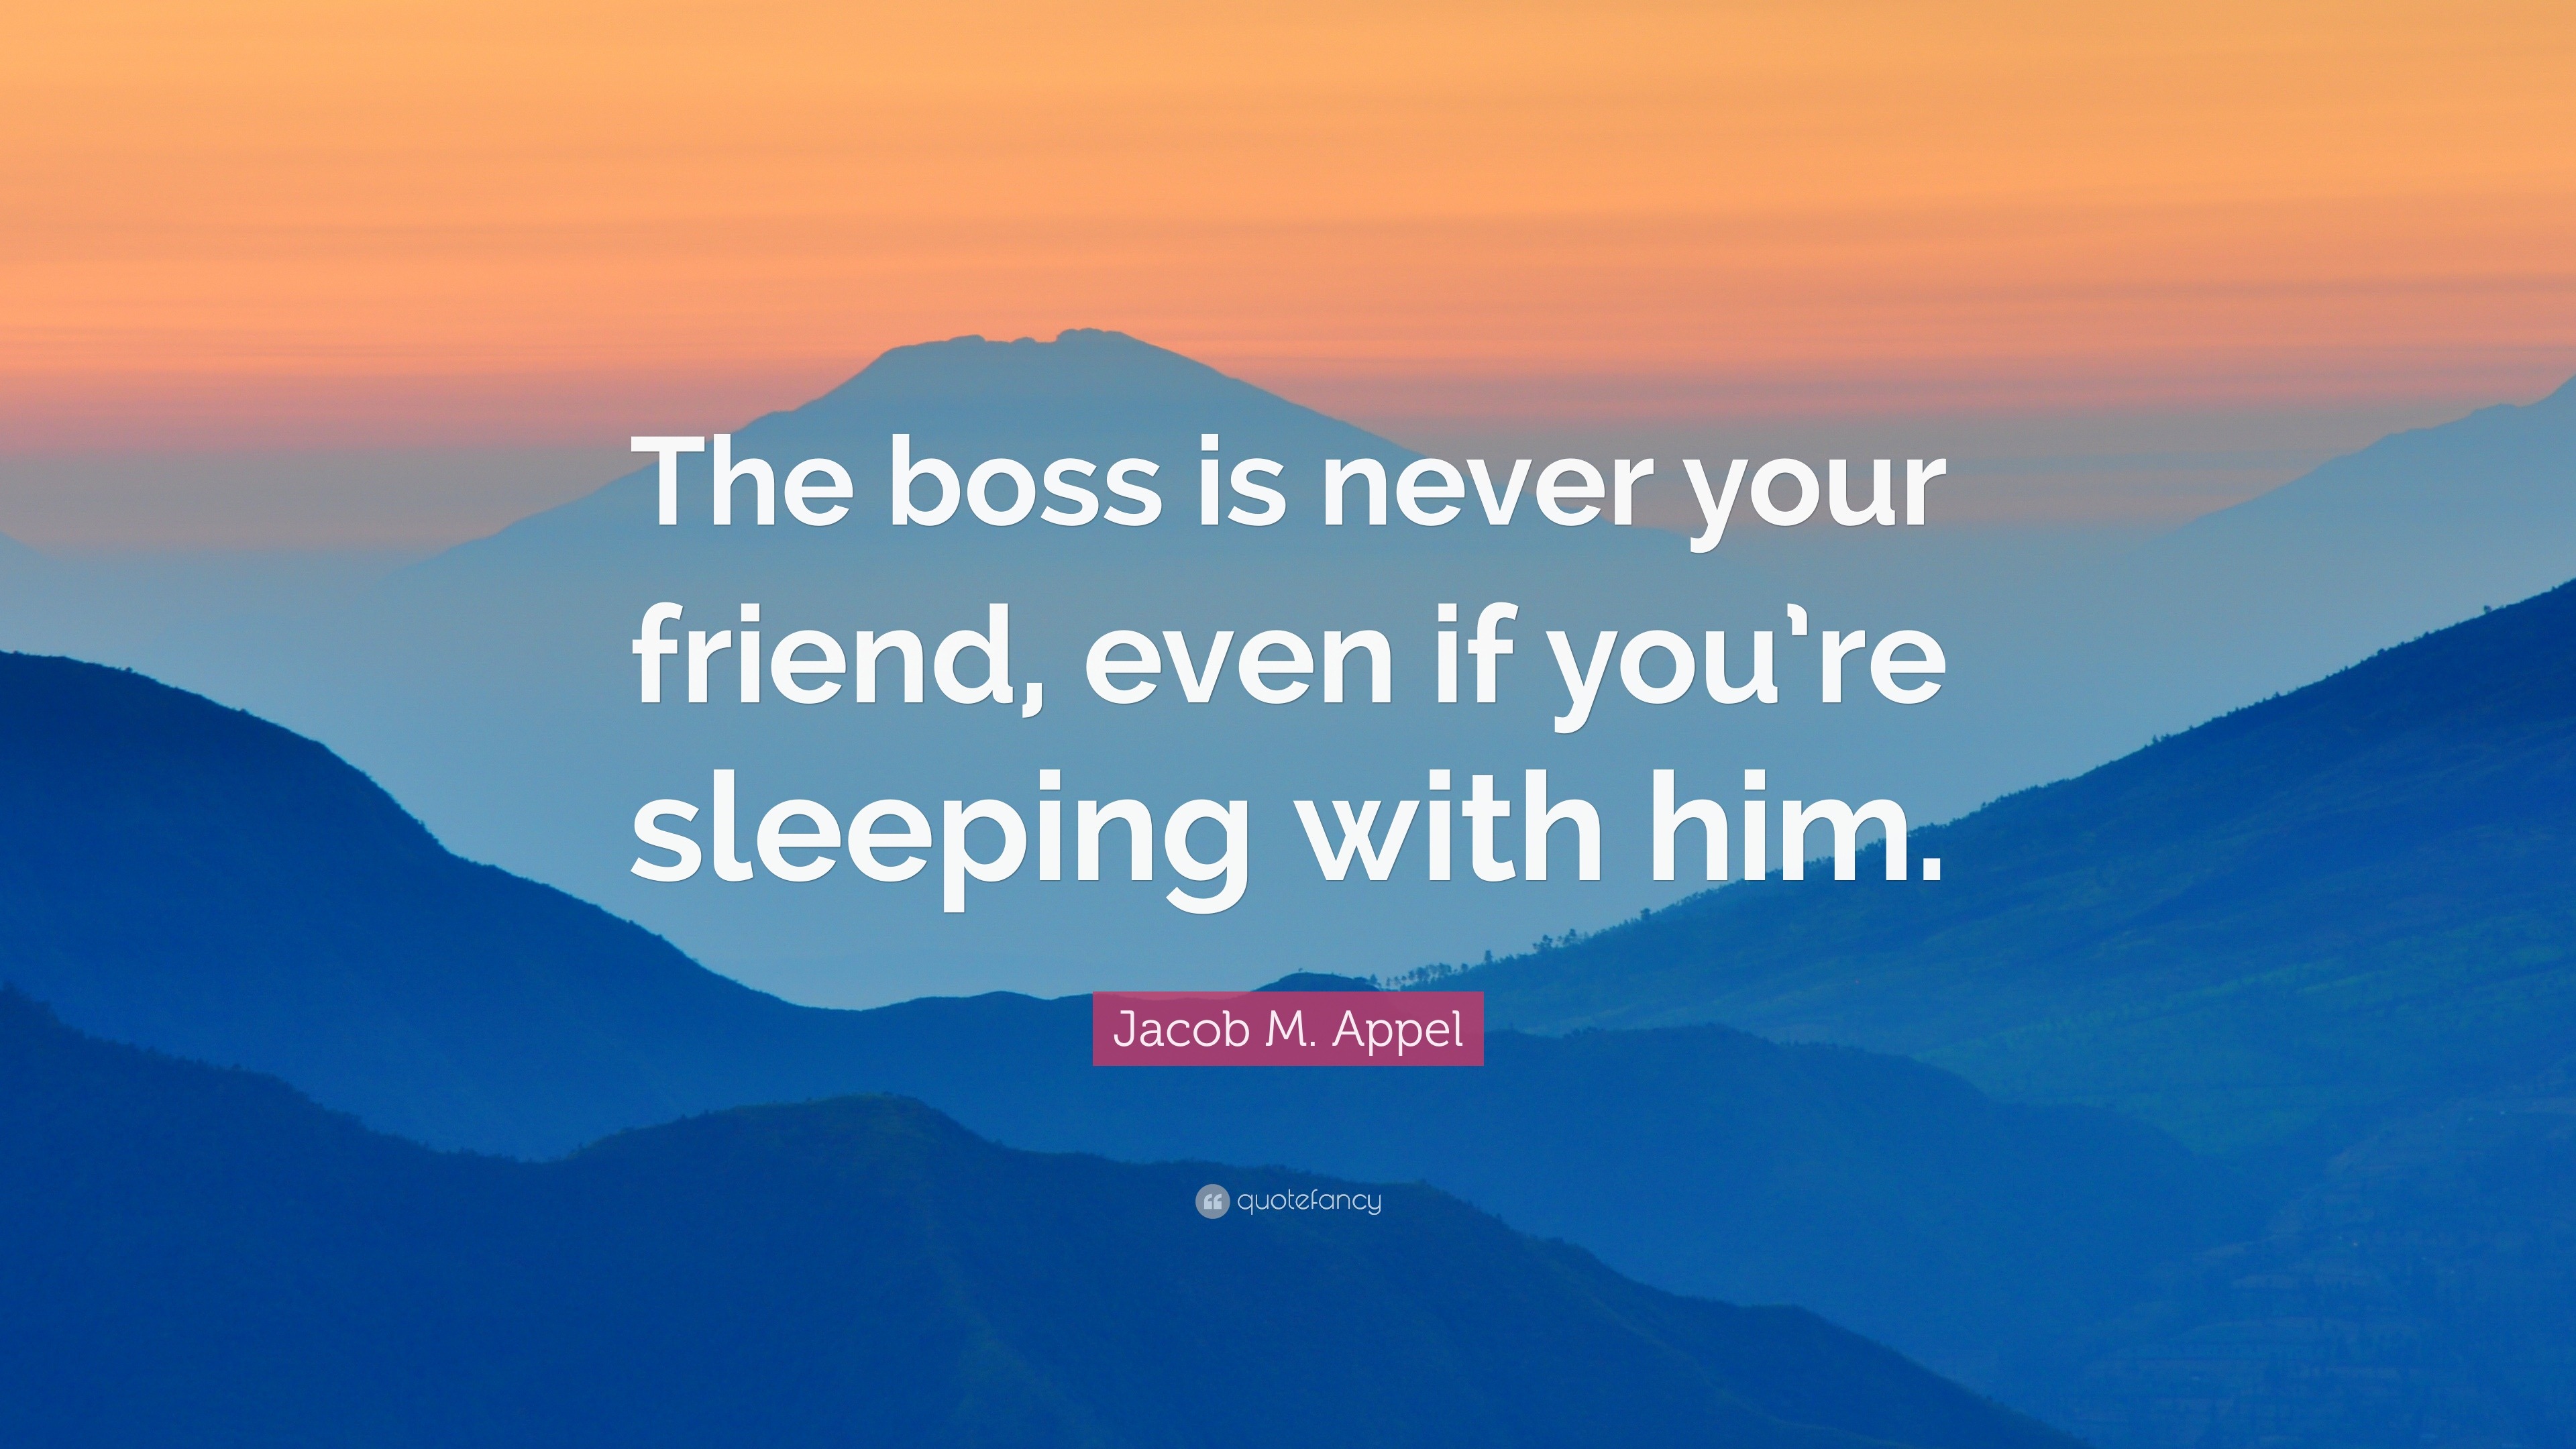 Jacob Appel “The boss is never your friend, even if sleeping with